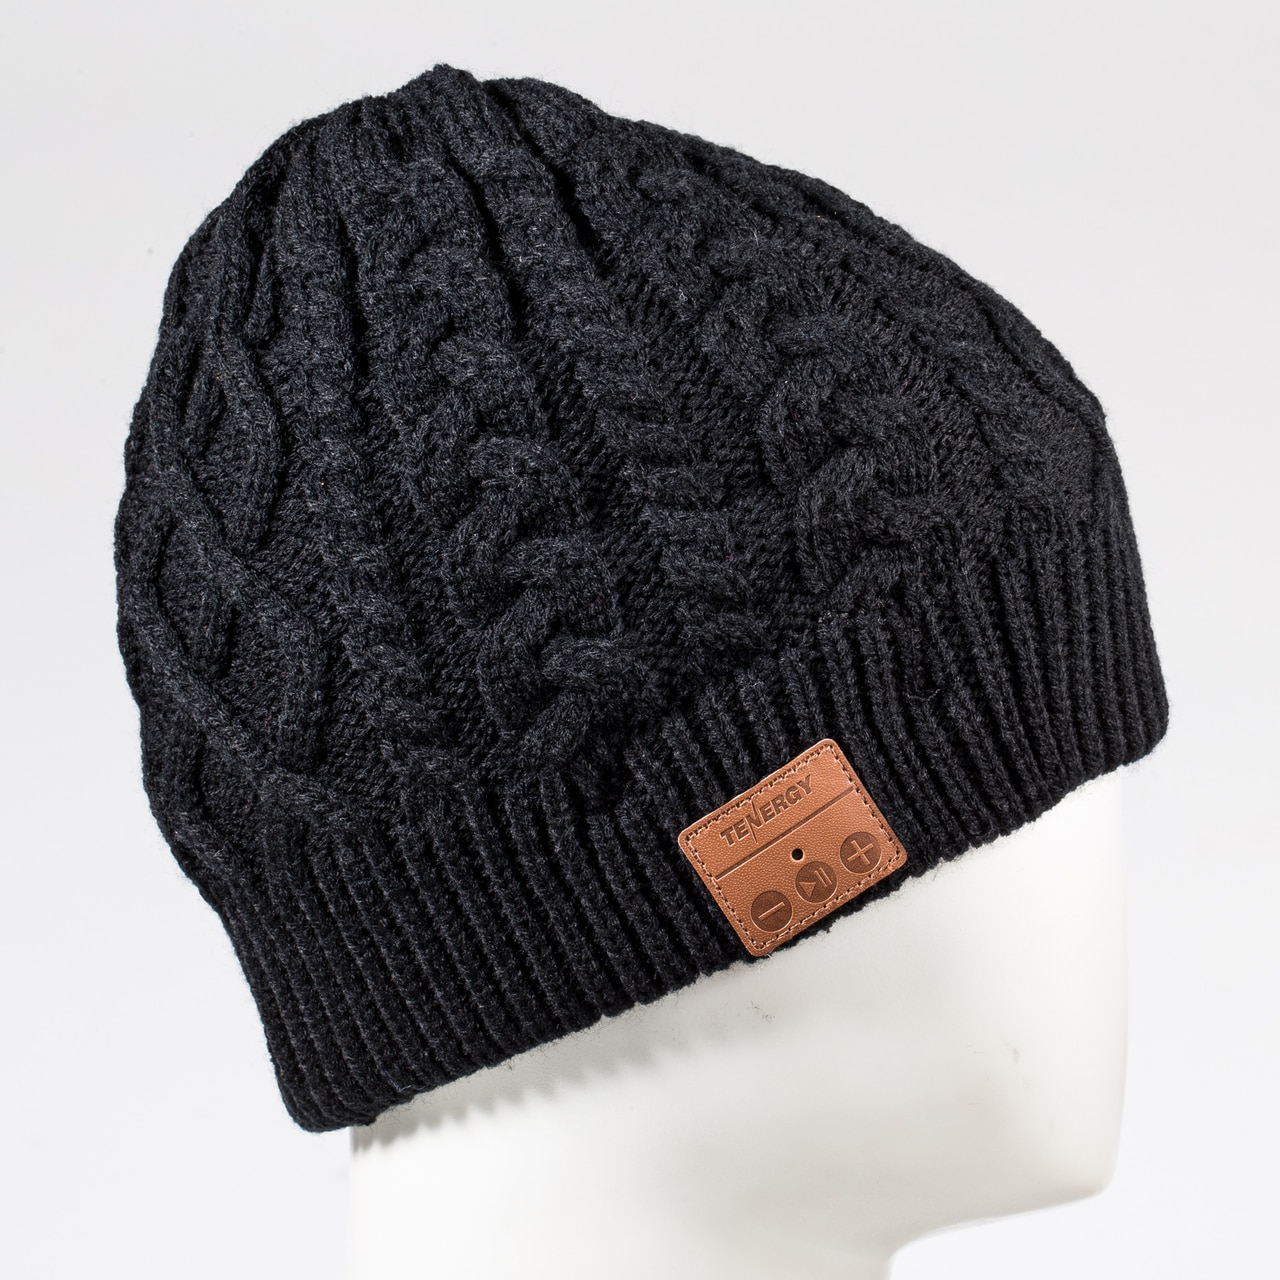 Tenergy Bluetooth Beanie Cable Knit - image 2 of 3